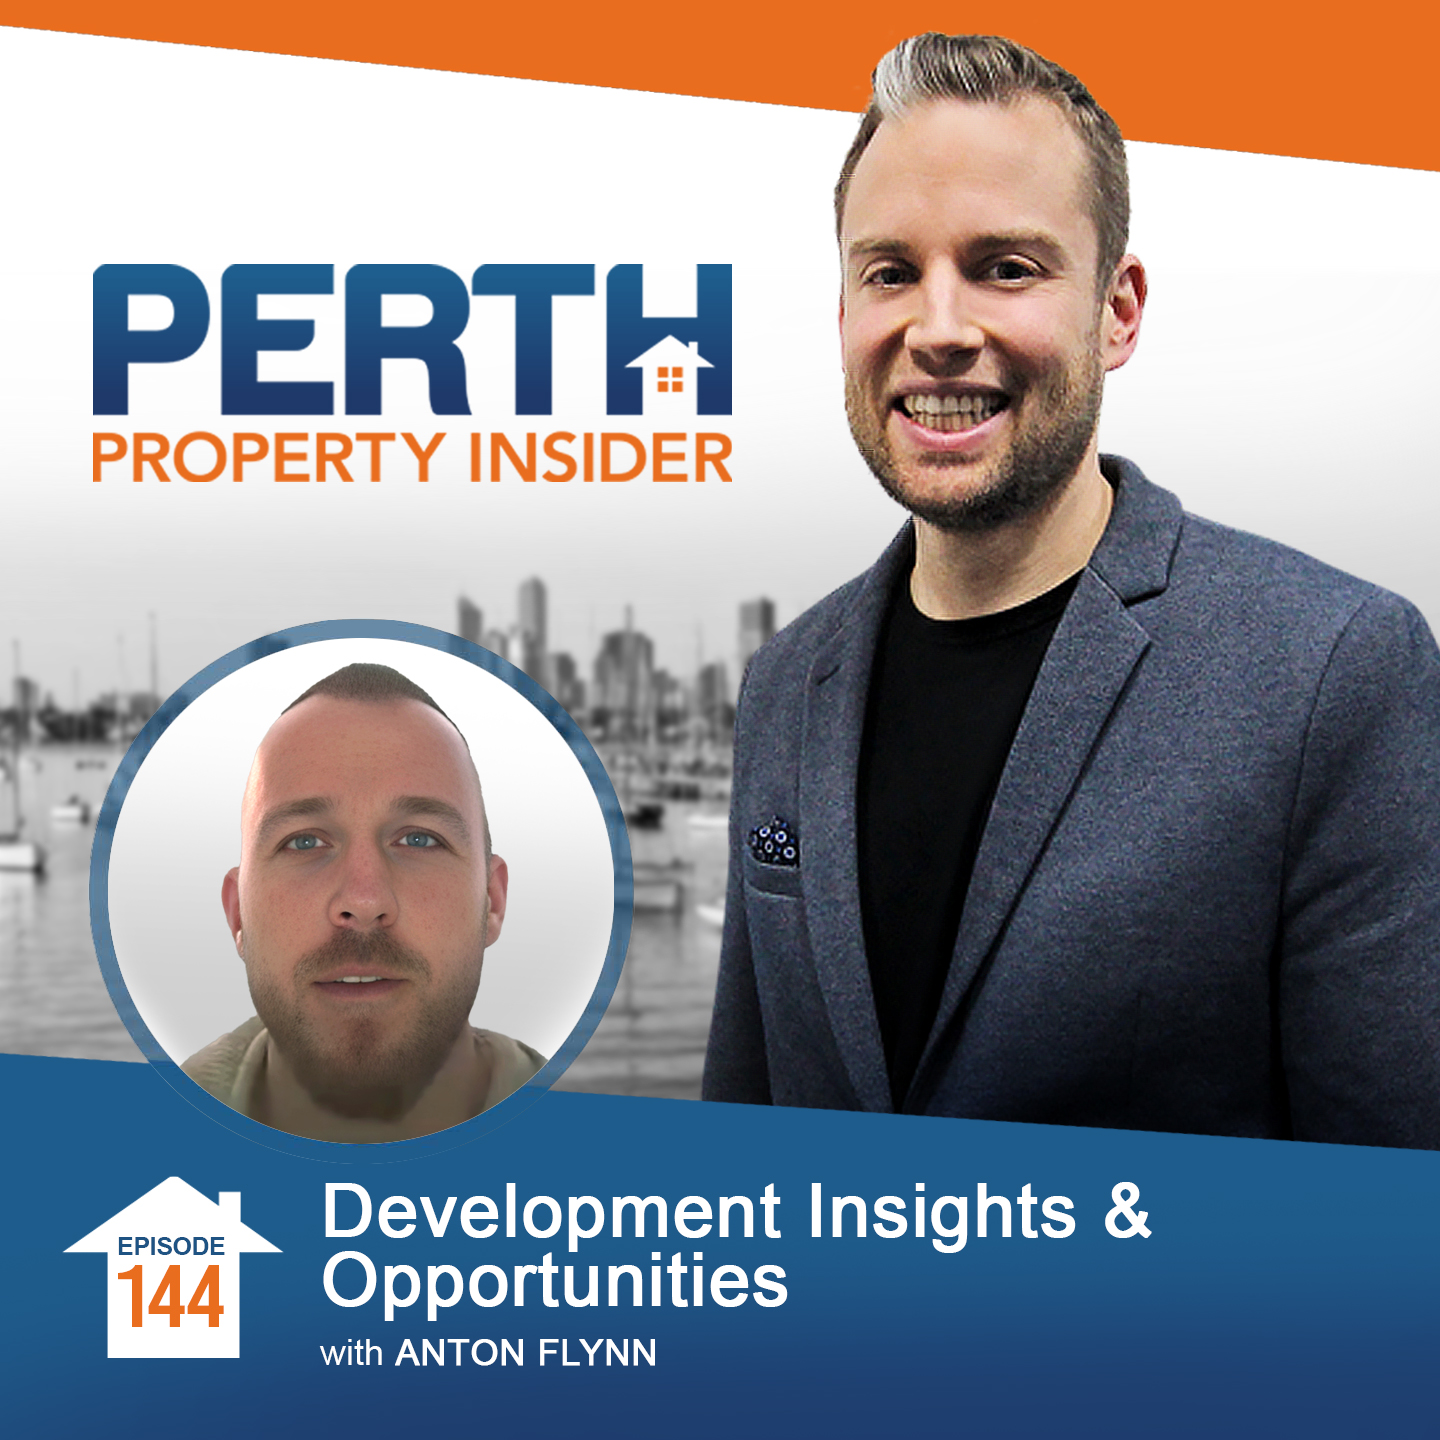 Development Insights & Opportunities with Anton Flynn